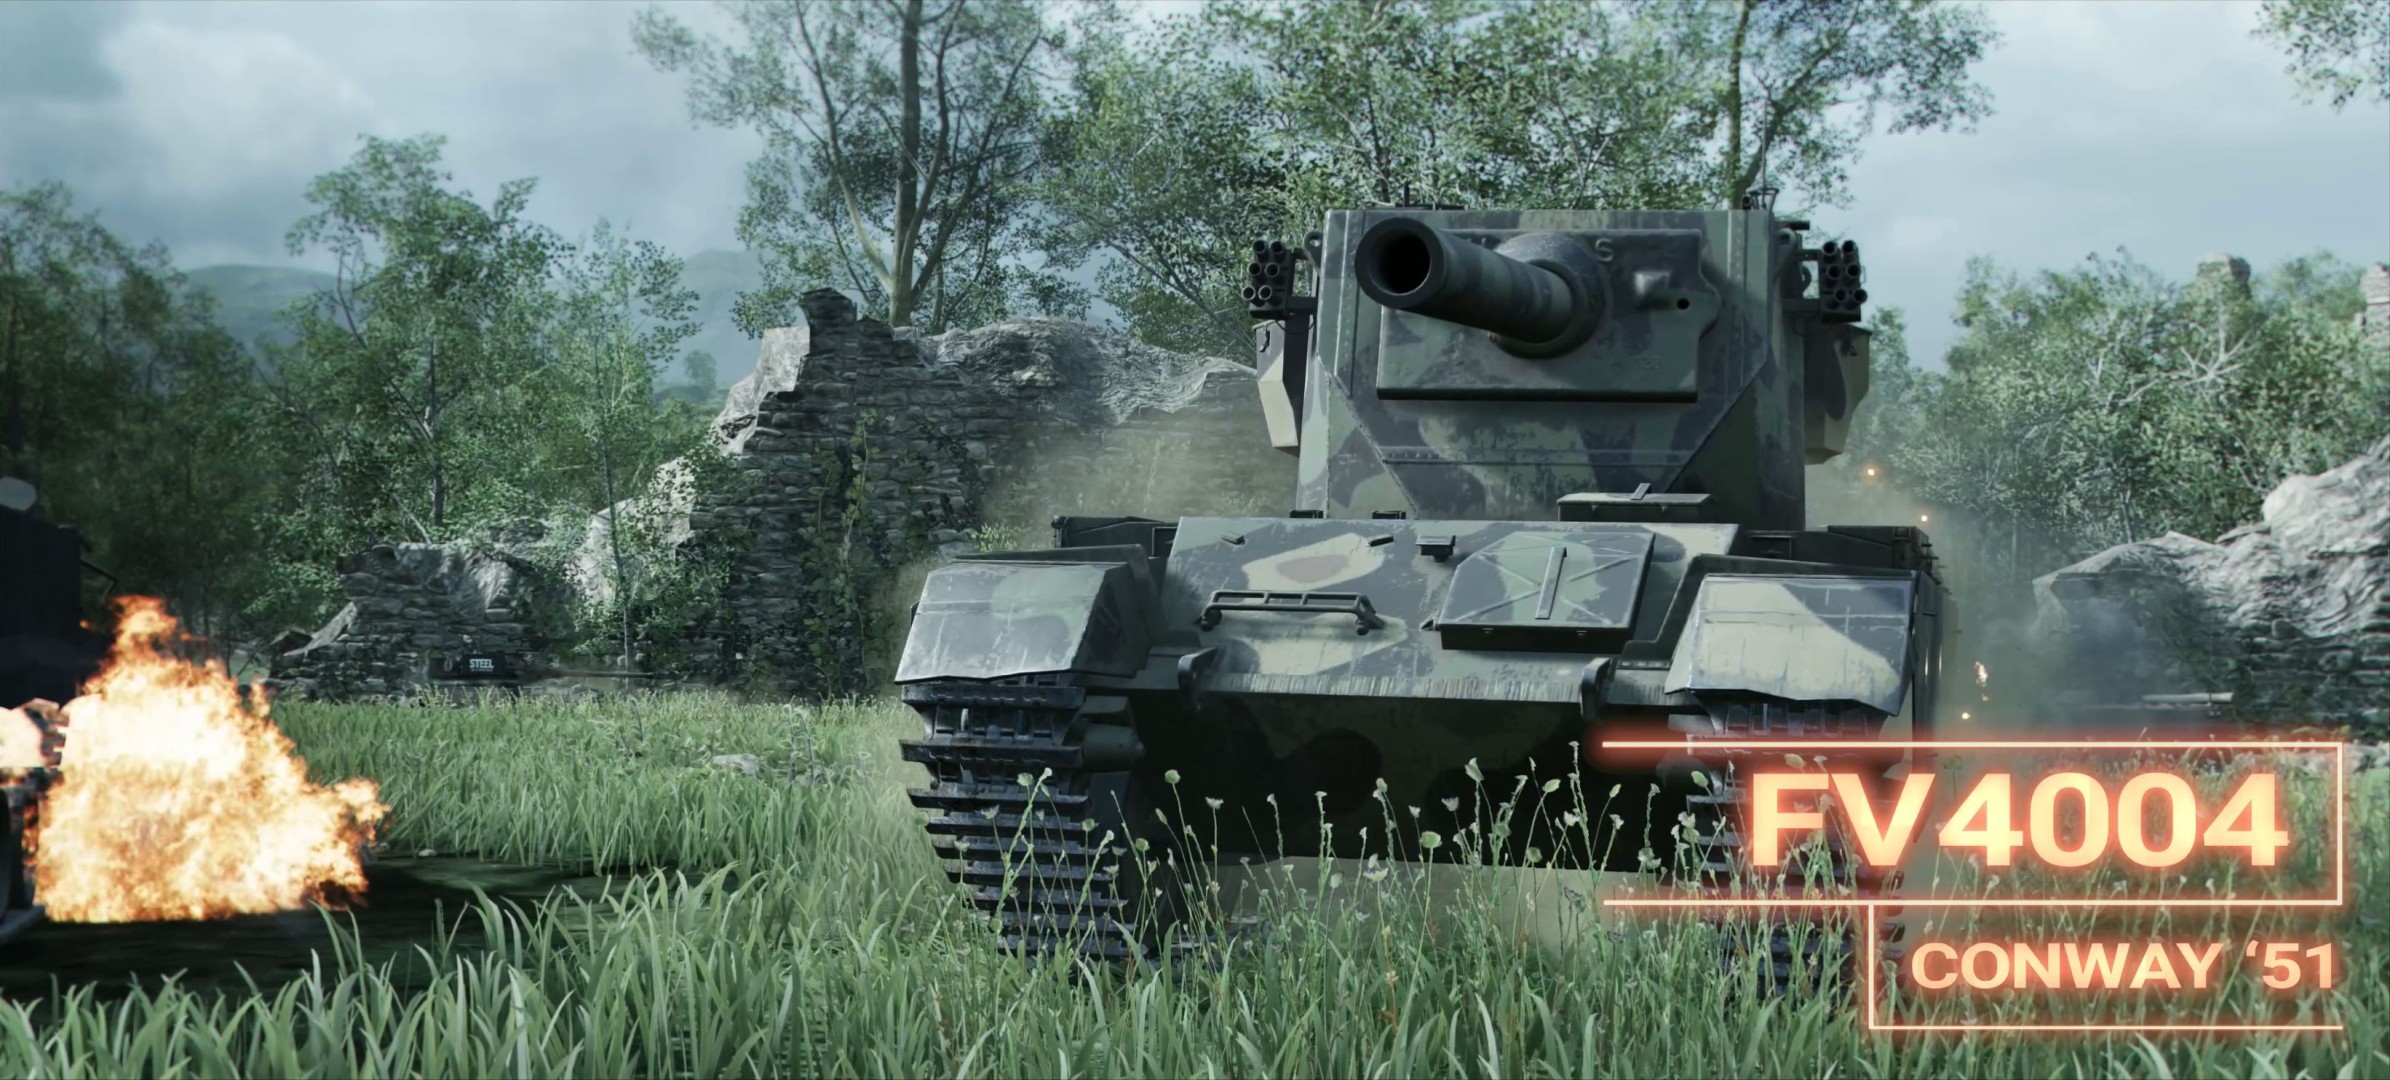 World of Tanks Deploys the Largest Tanks Update Yet with Modern Armor -  Xbox Wire